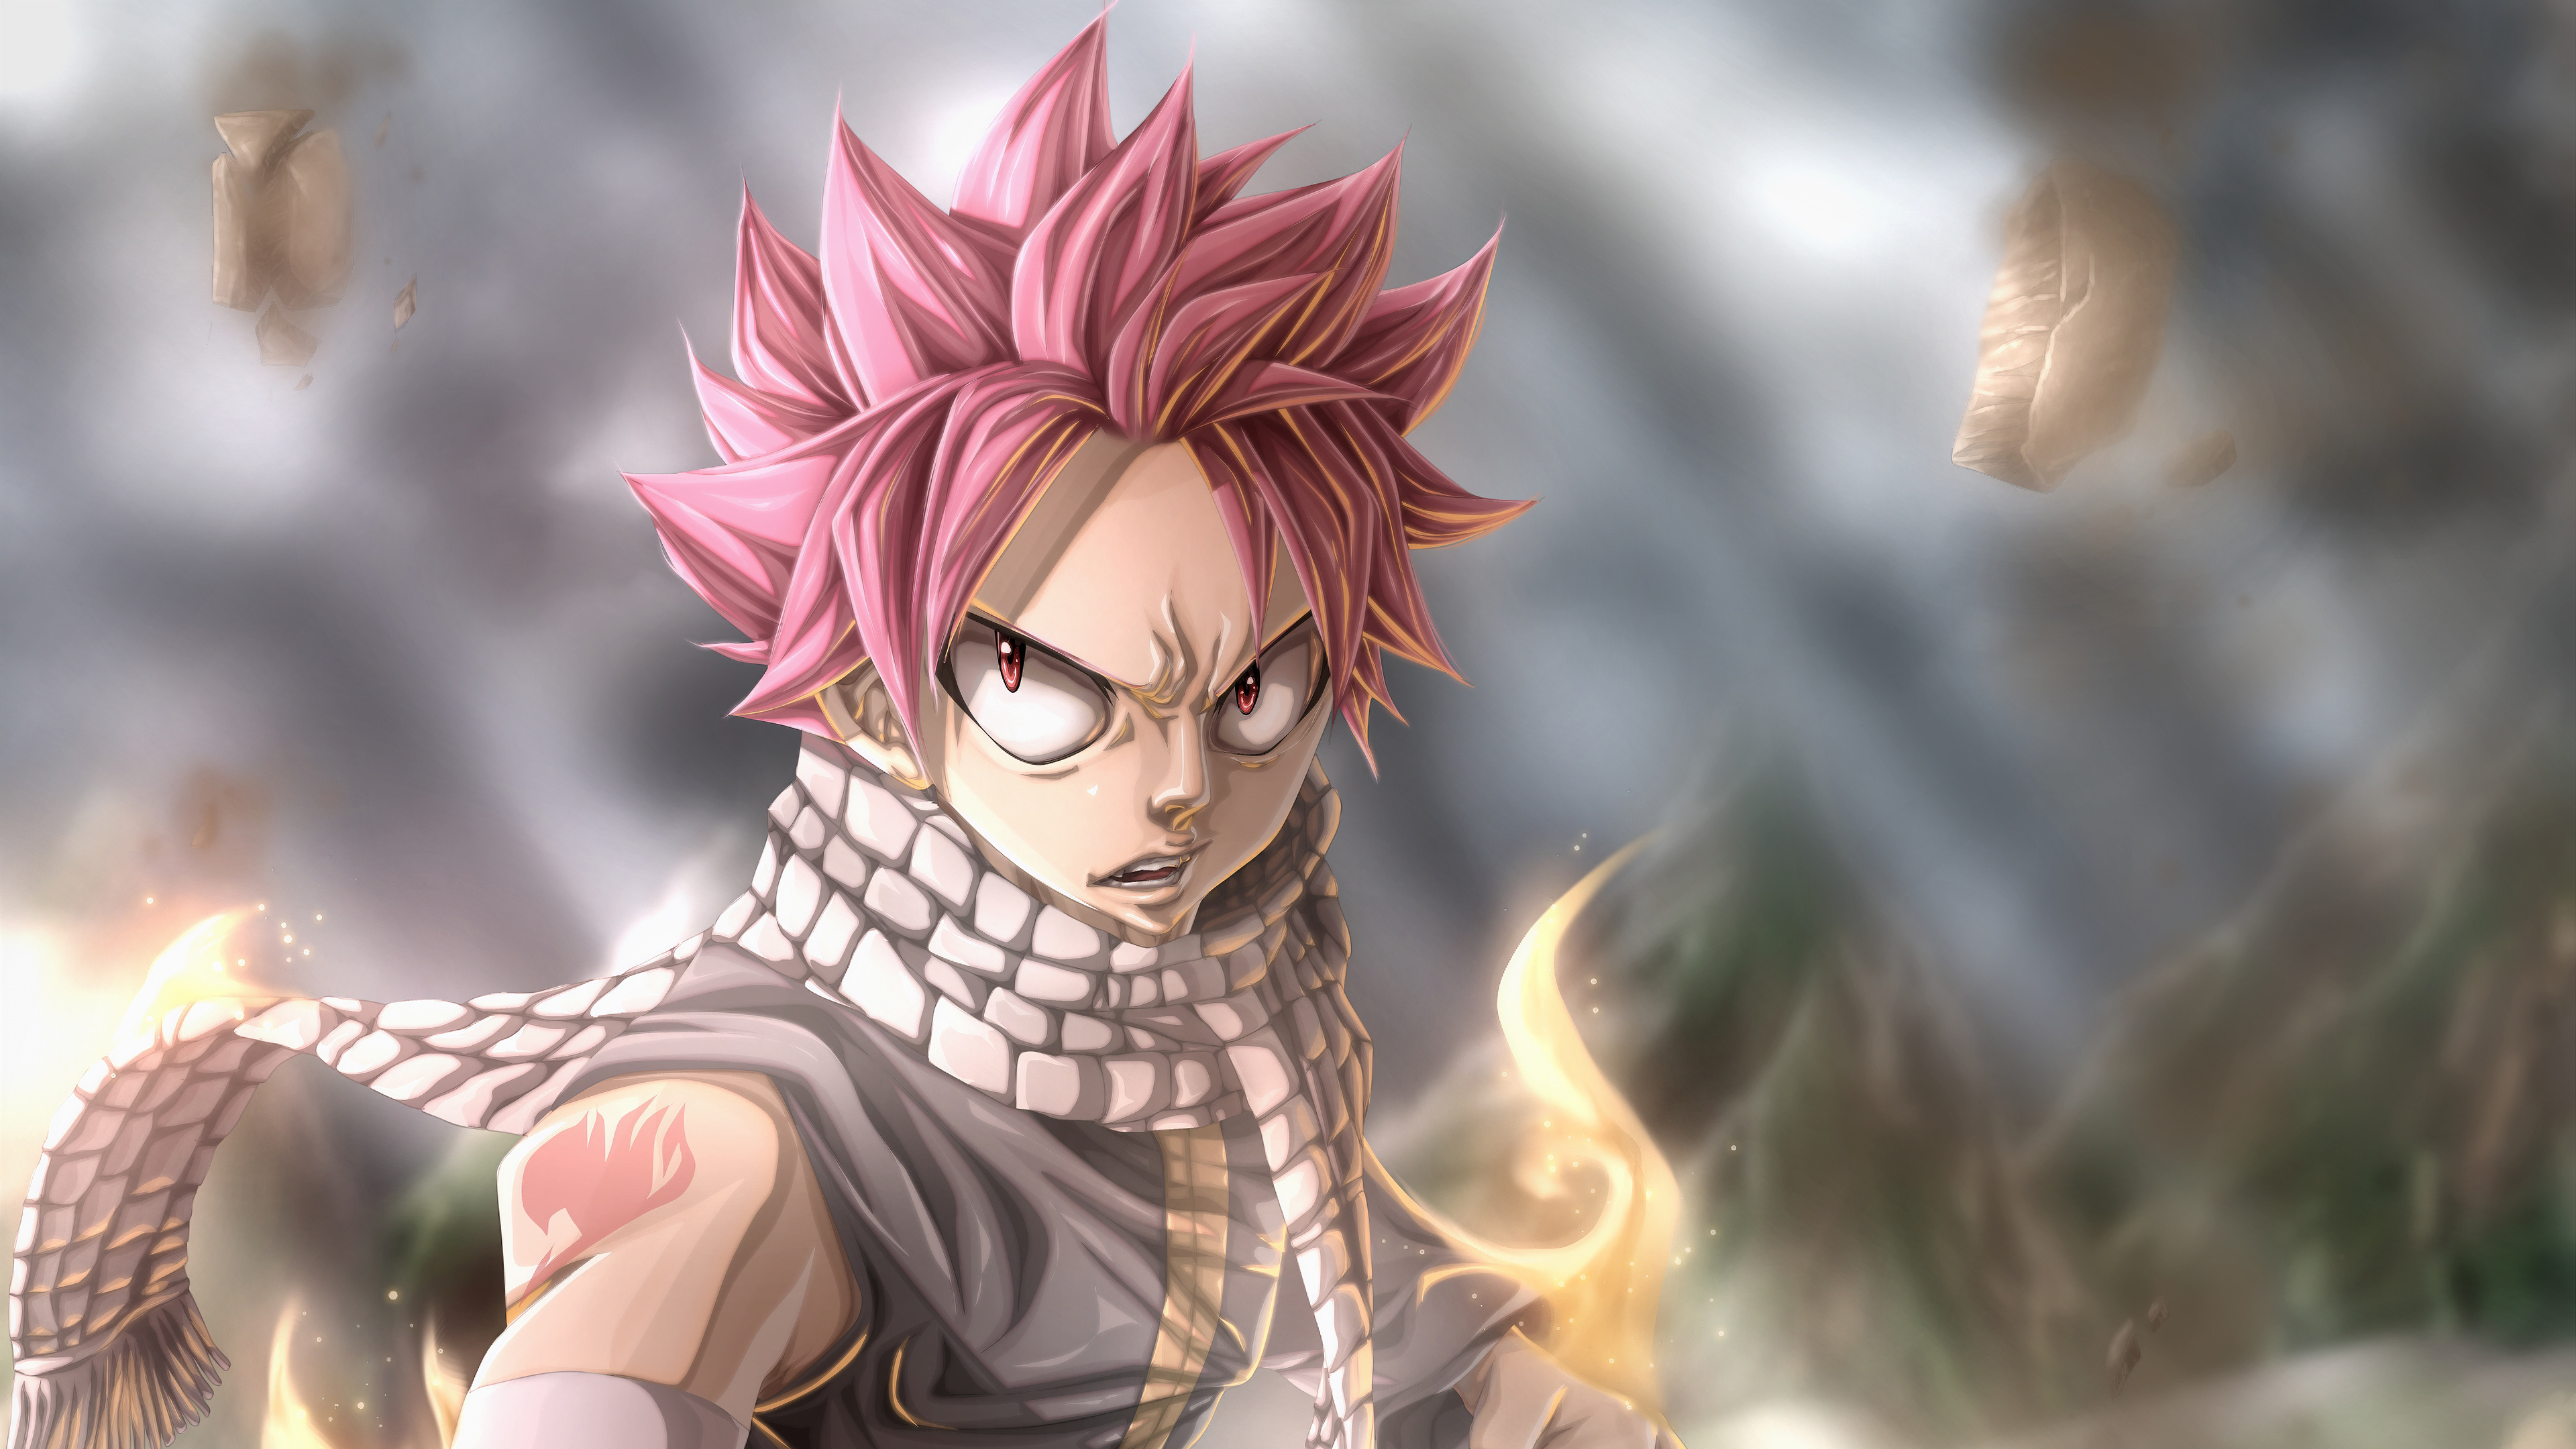 Natsu Fairy Tail Anime 4k, HD Anime, 4k Wallpapers, Images, Backgrounds,  Photos and Pictures